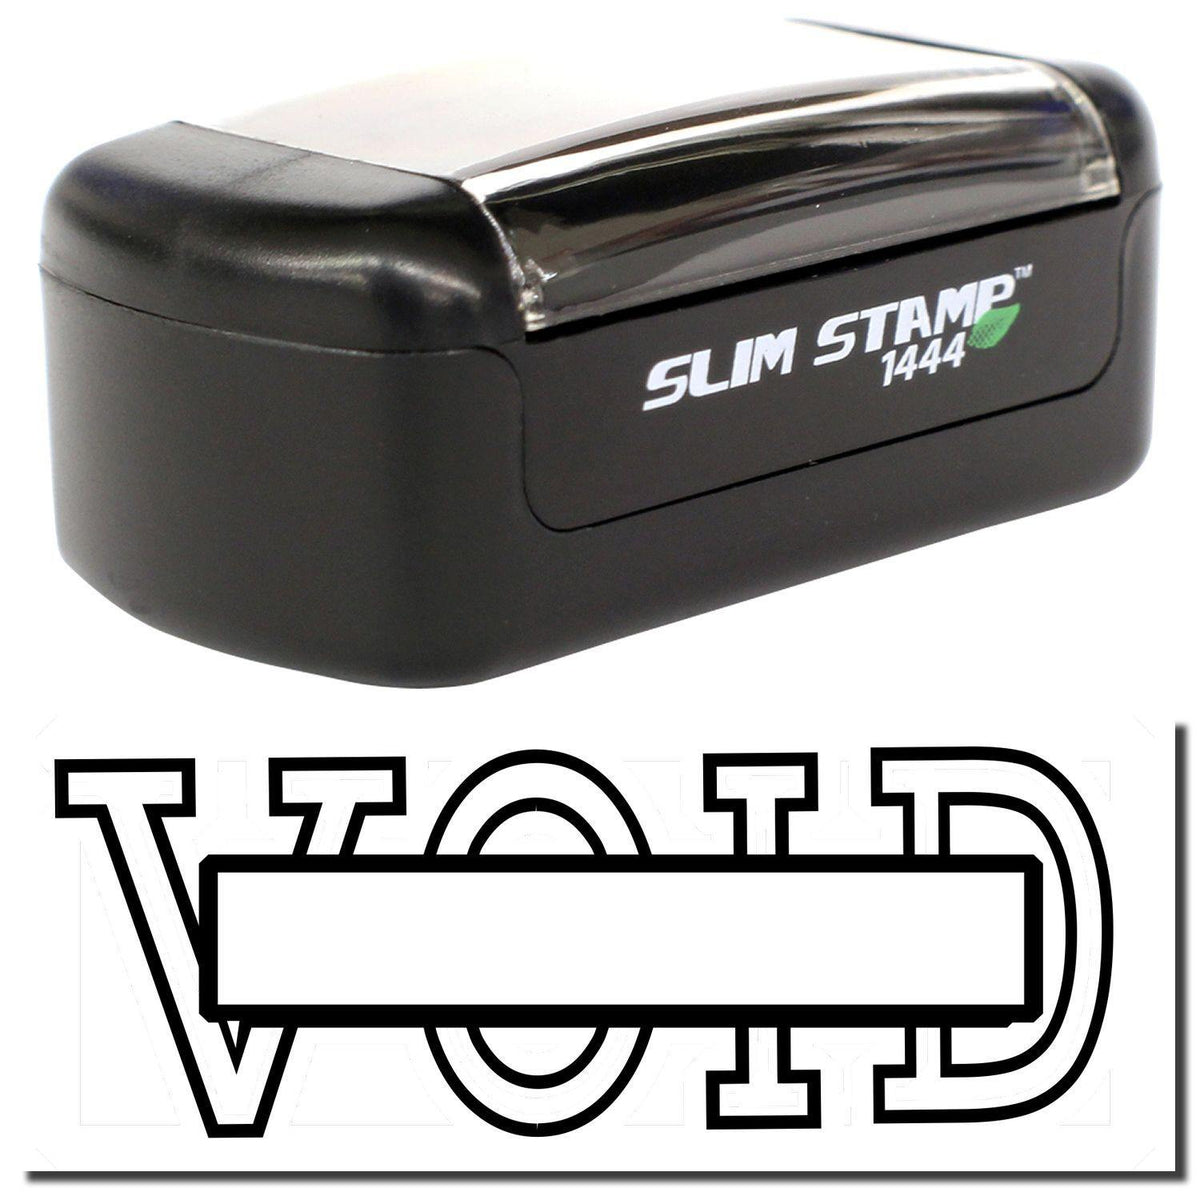 A slim pre-inked stamp with a stamped image showing how the text &quot;VOID&quot; in a large outline font with the box in the center of the text is displayed after stamping.